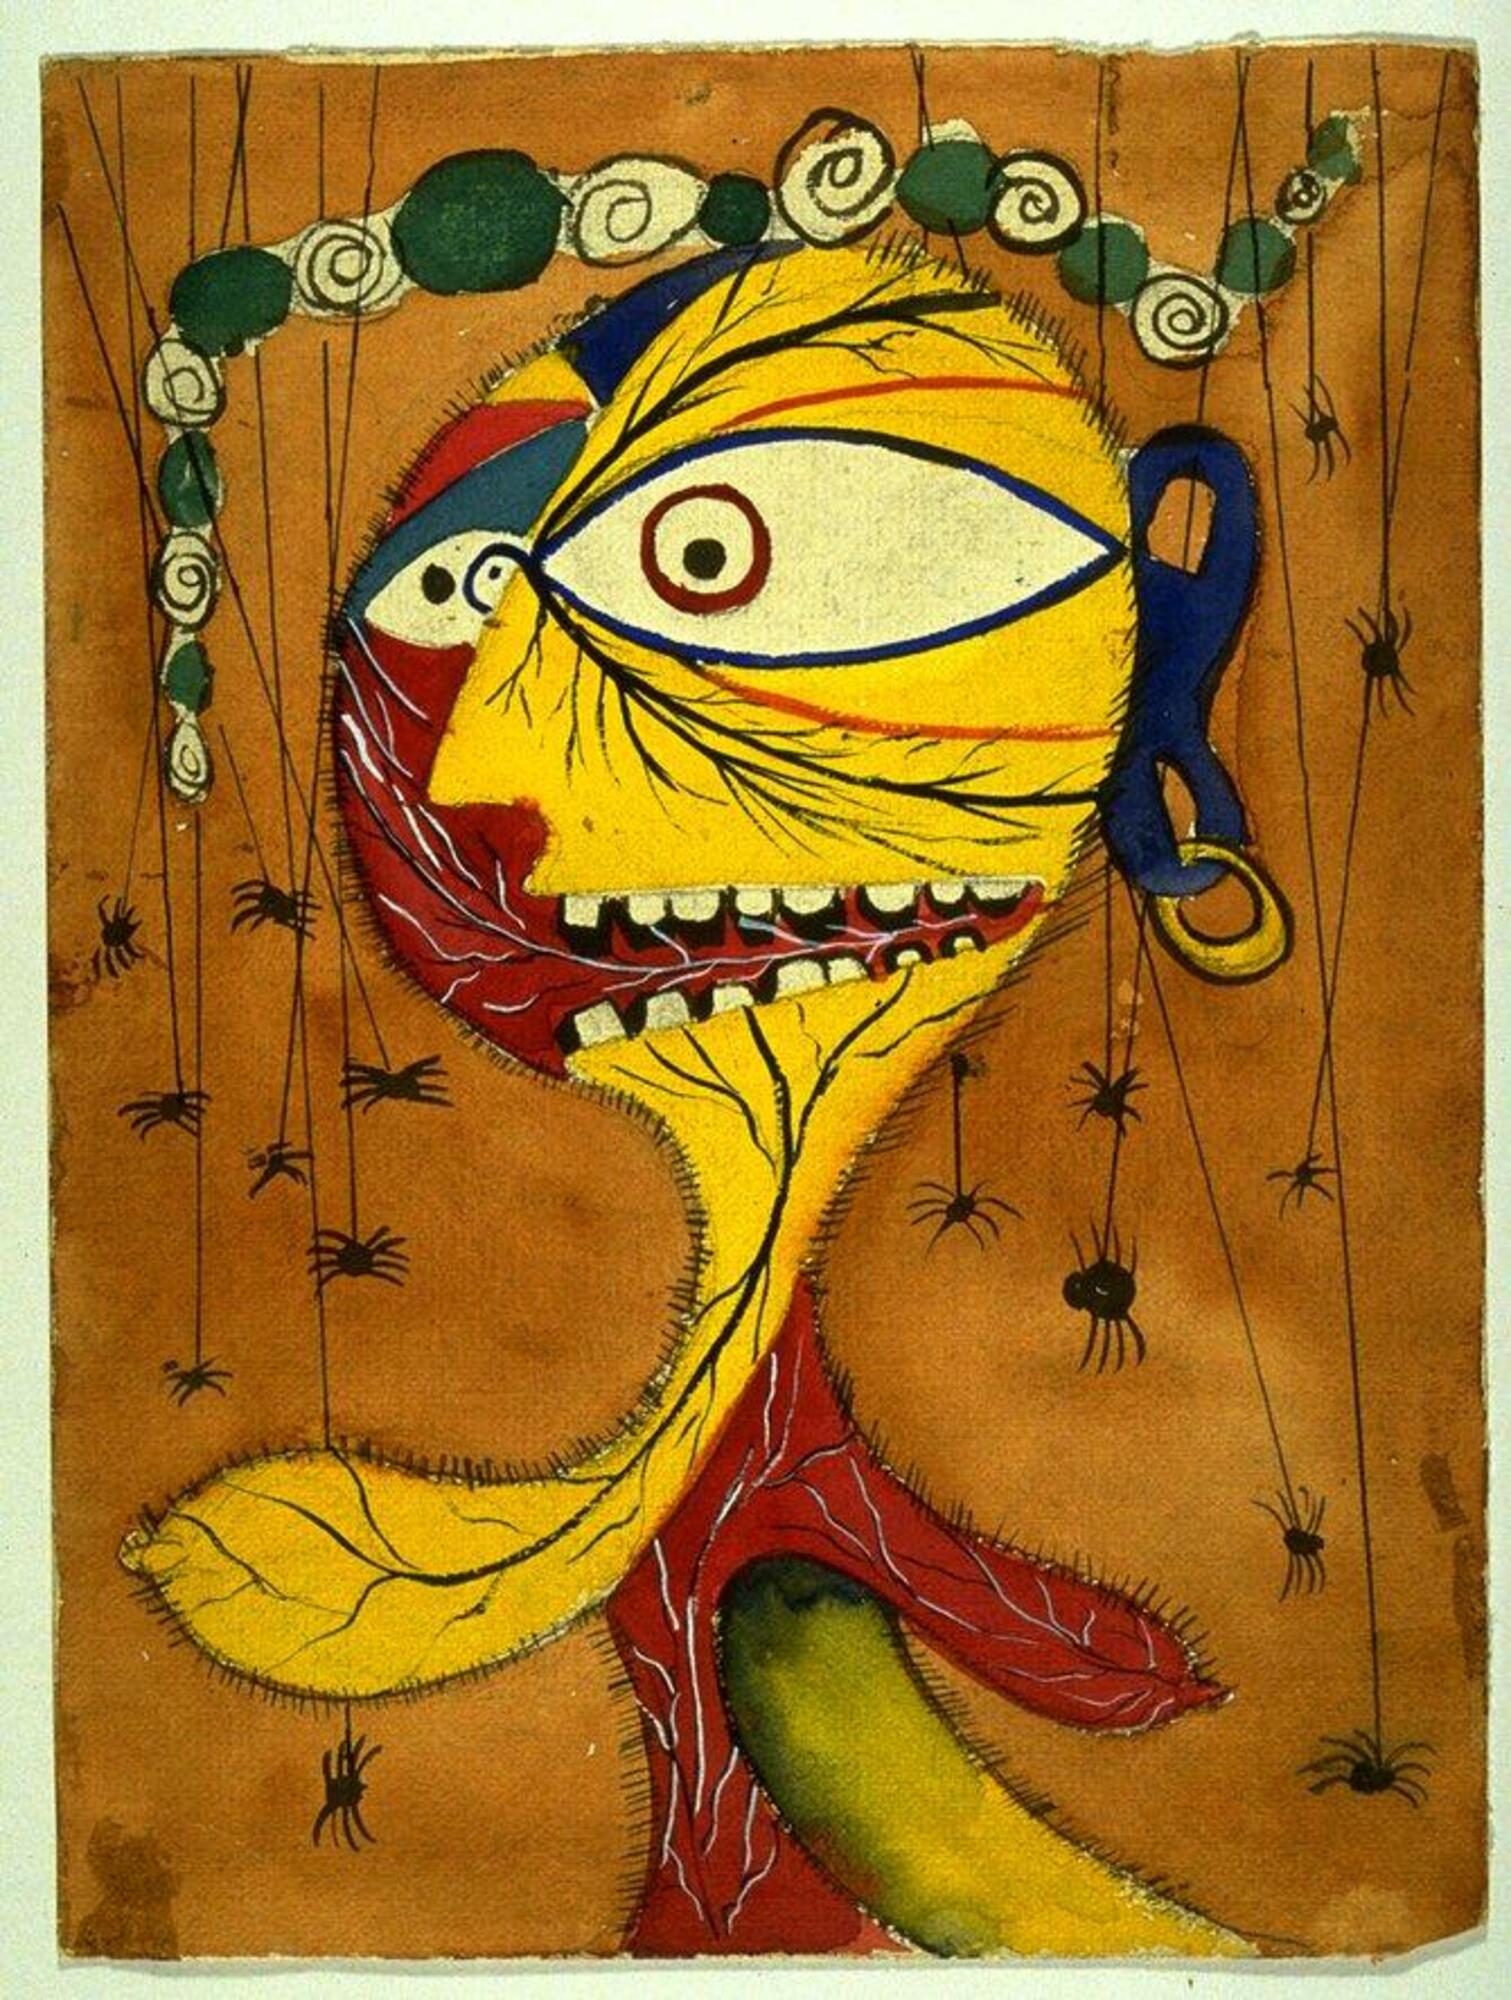 At the center of this work, there is a red, yellow, and blue figure with a gold hoop earring in the right ear. Eight black spiders dangle from lines on each side of figure and a snake-like createure is at the top. The whole watercolor has a rusty-orange backdrop.